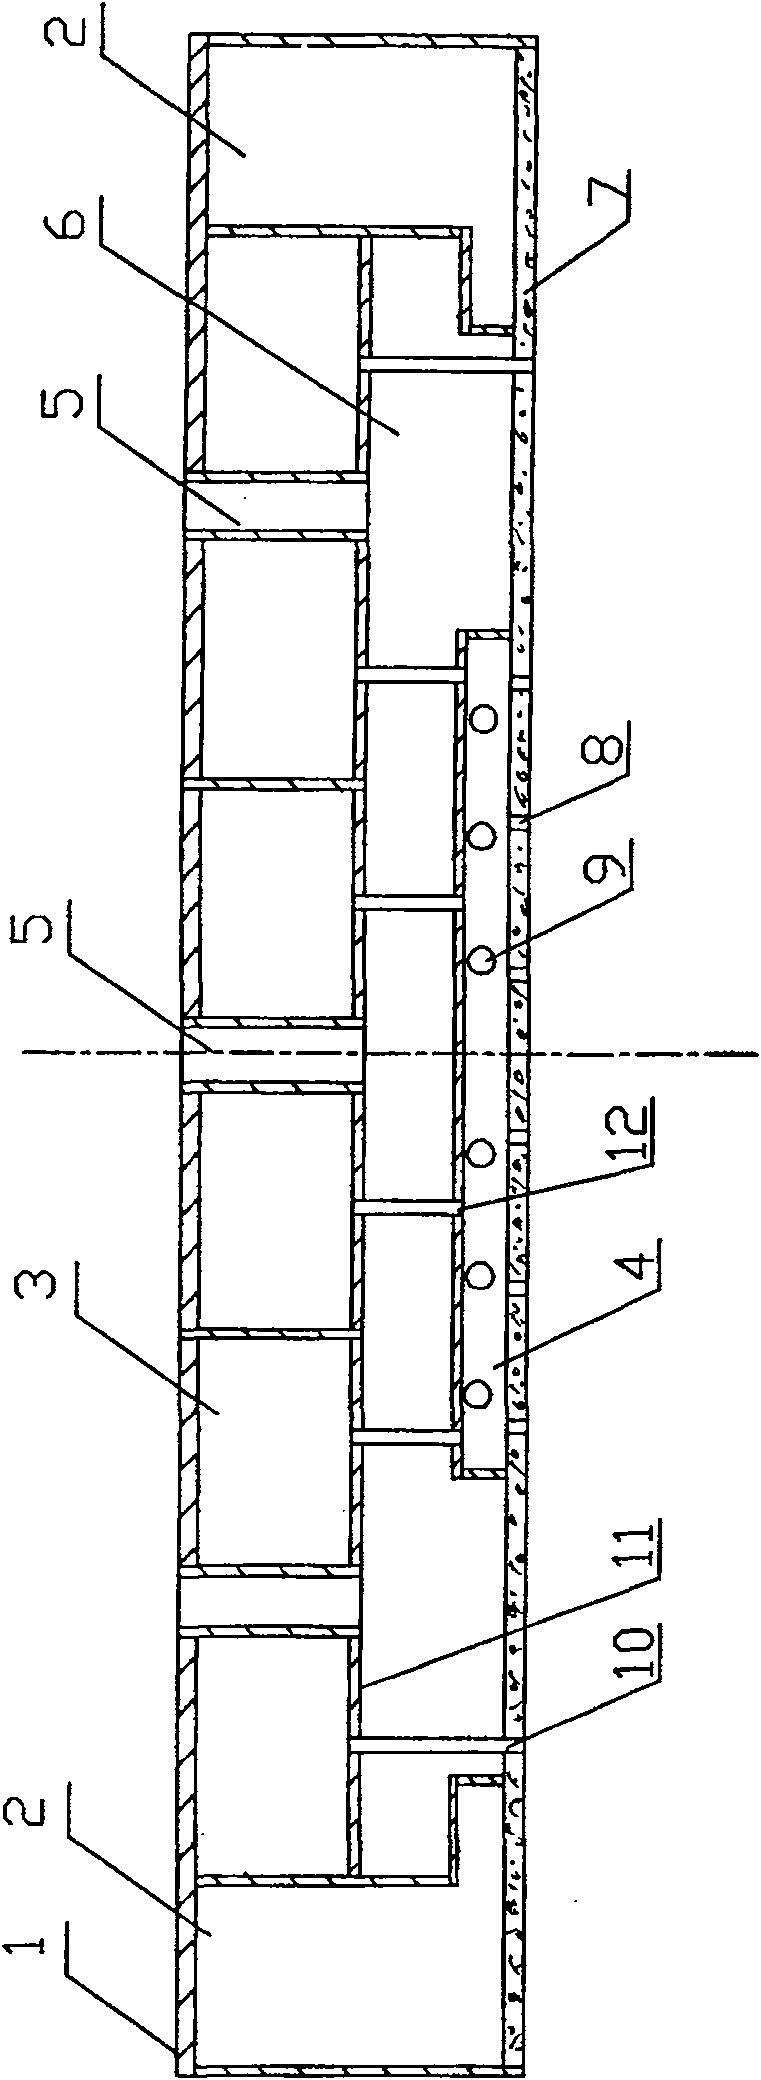 Box-shaped floating type dock gate with open bottomtank